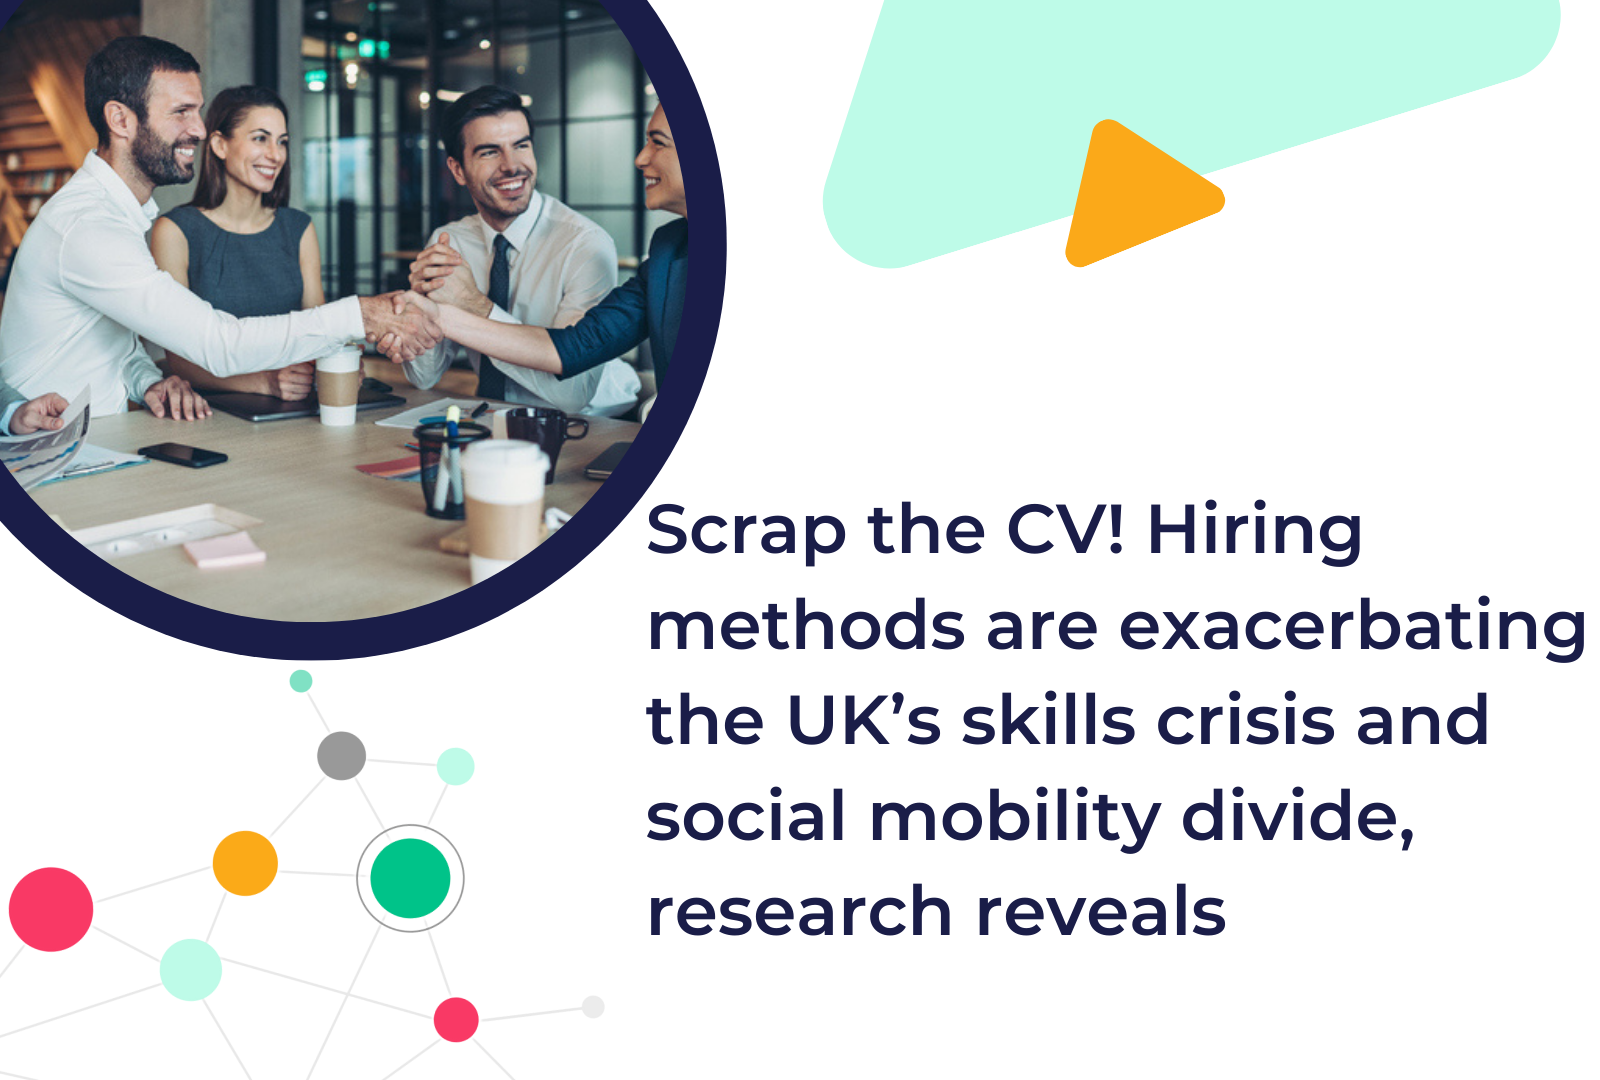 Scrap the CV! Hiring methods are exacerbating the UK’s skills crisis and social mobility divide, research reveals